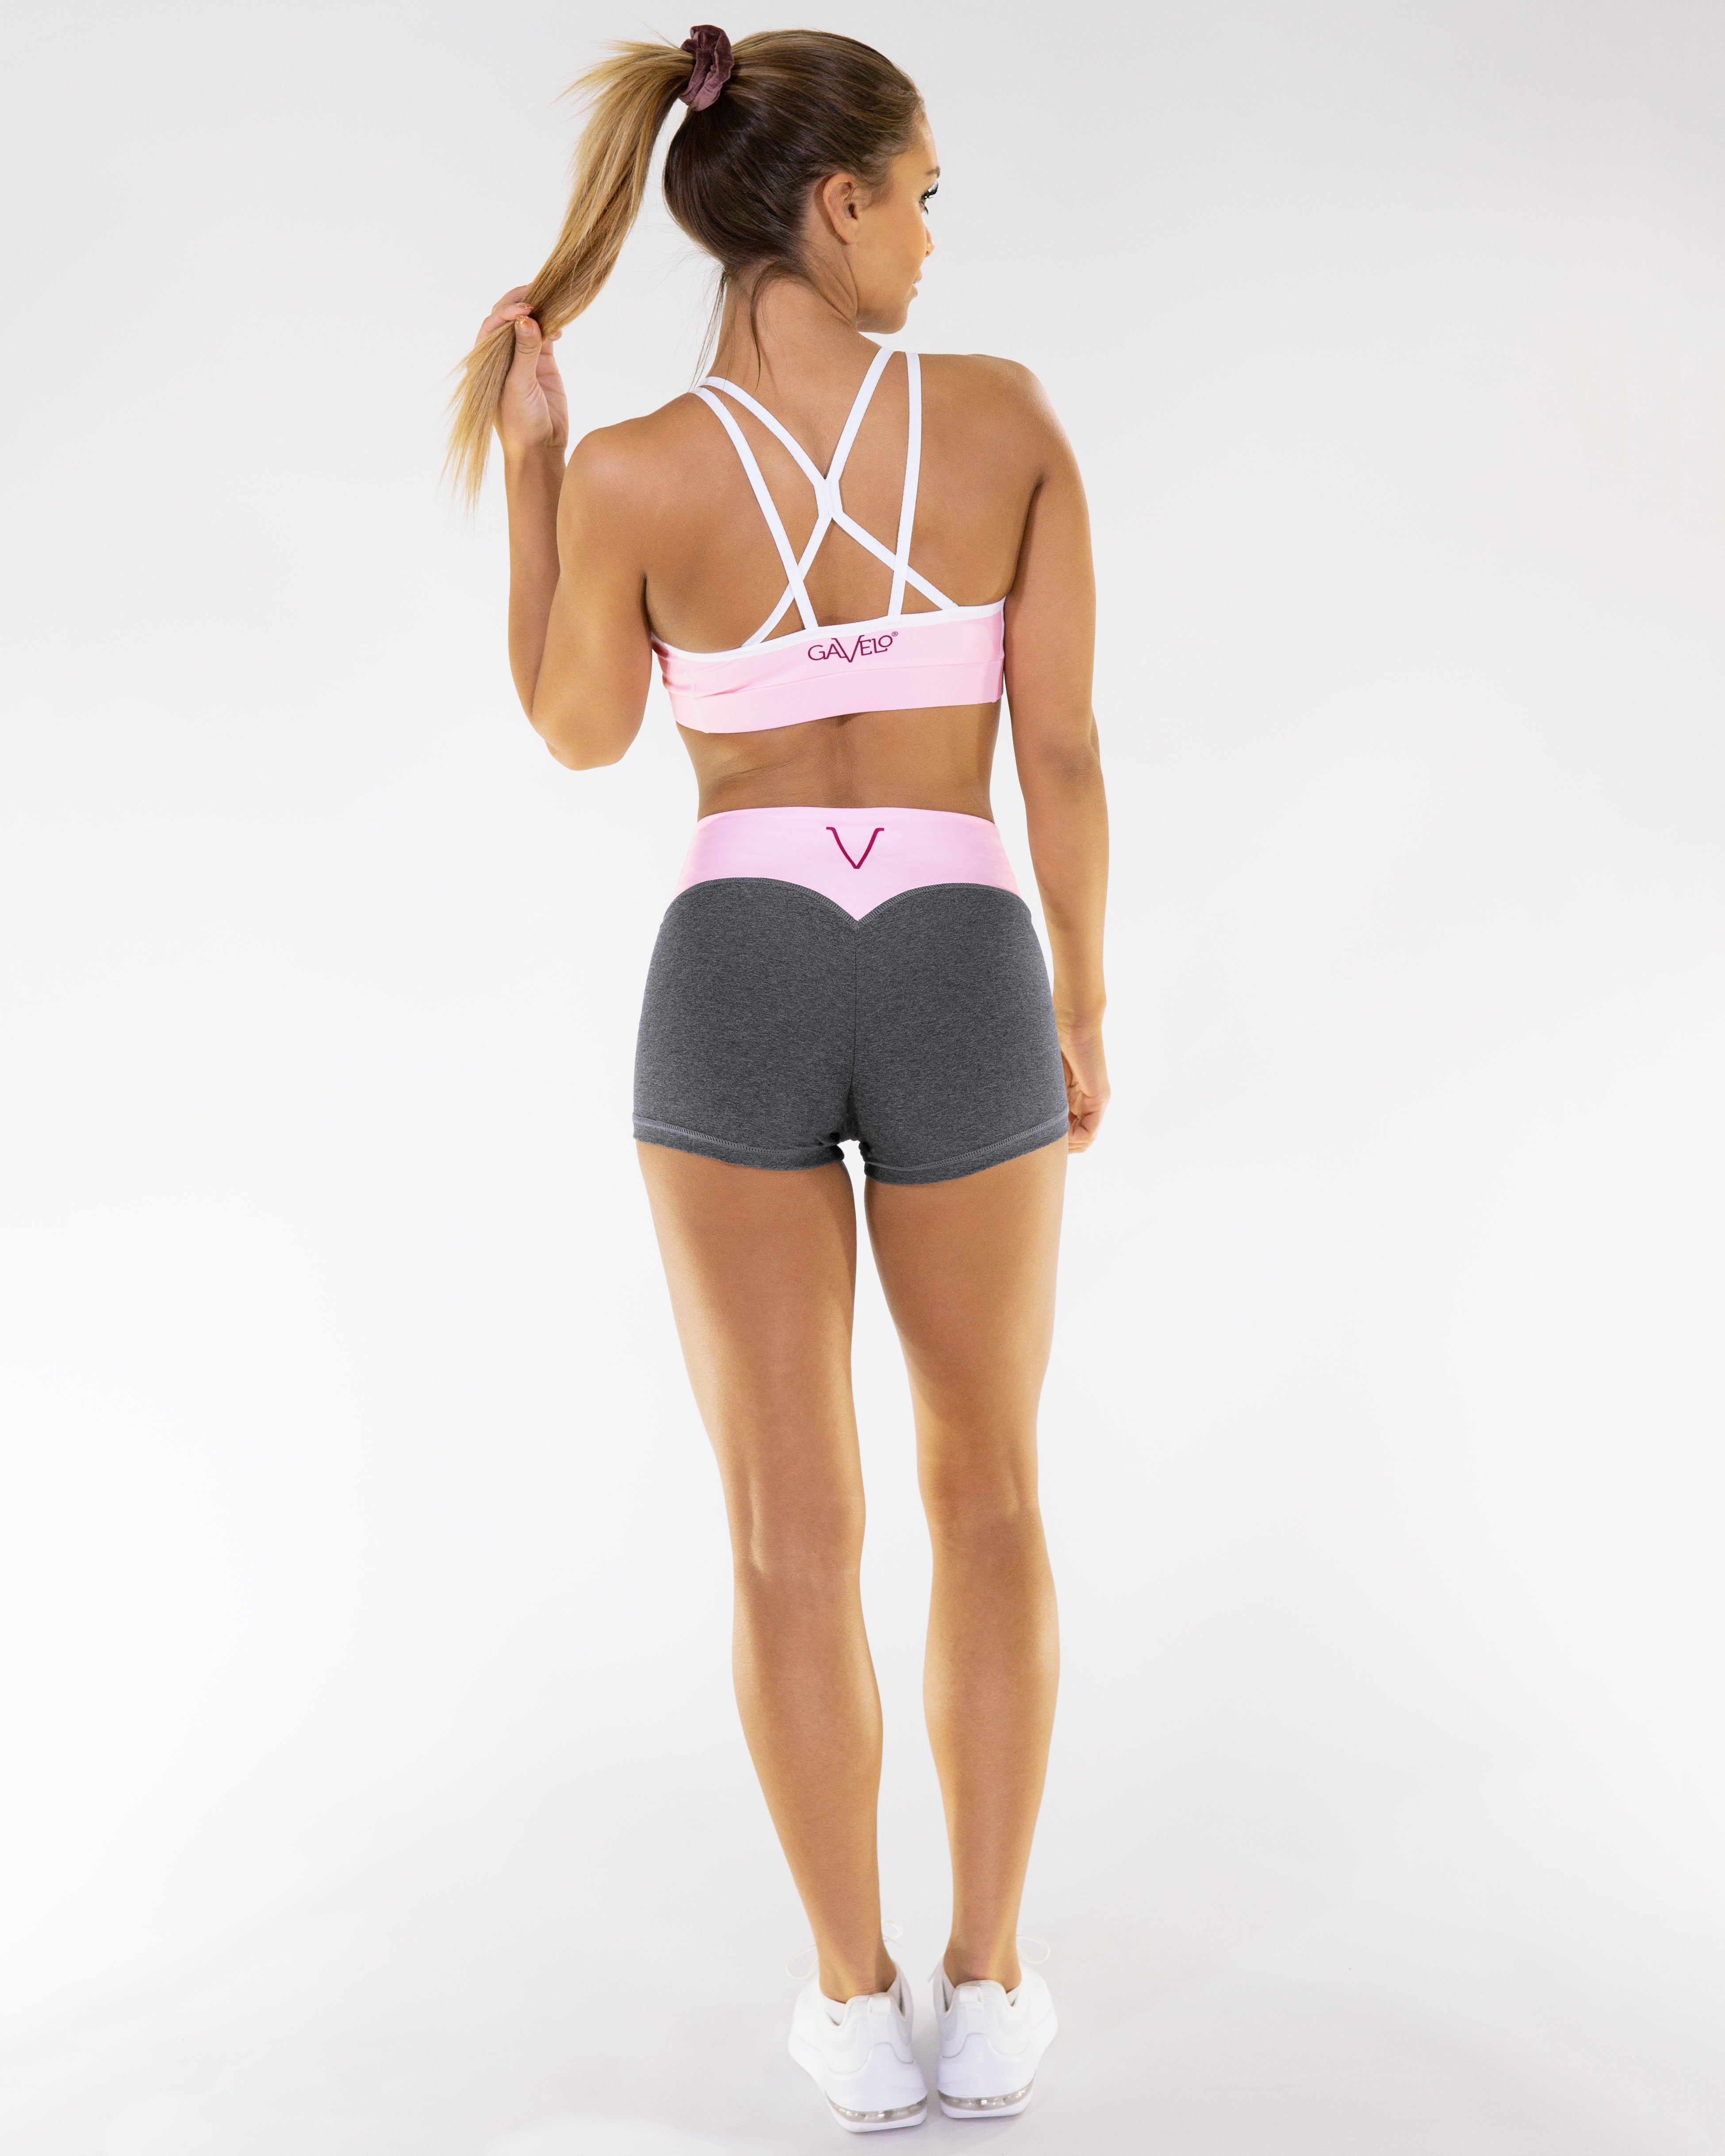 Gavelo sport short Raspberry ⭐ Fit&Style - Fit&Style